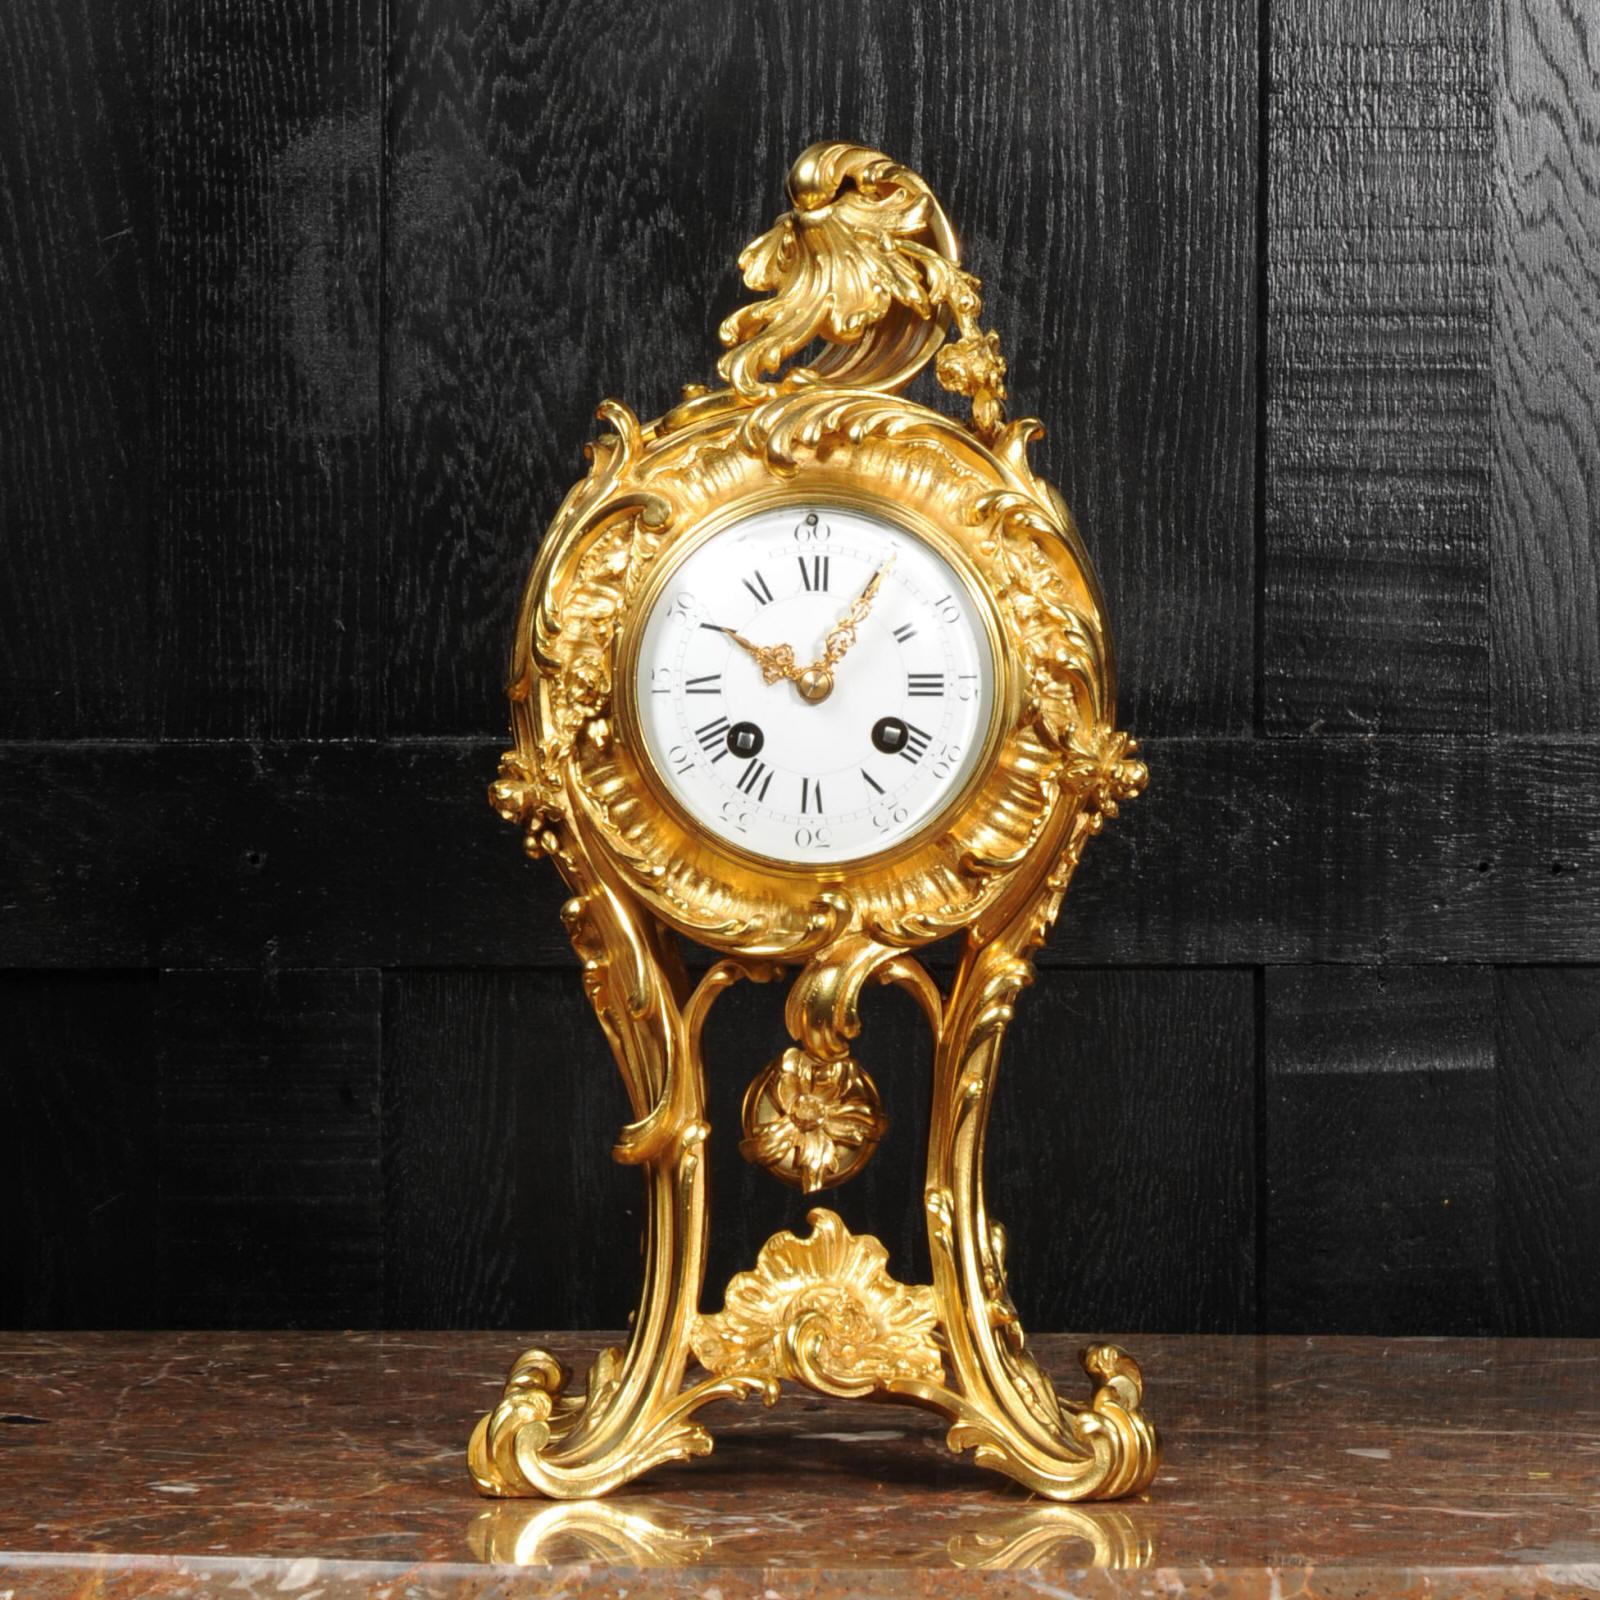 A stunning antique French clock, circa 1870, finely modelled in ormolu (finely gilded bronze). It is a beautiful Rococo balloon shape with boldly flamboyant acanthus legs hold the movement aloft. The original ormolu pendulum swings gently below.